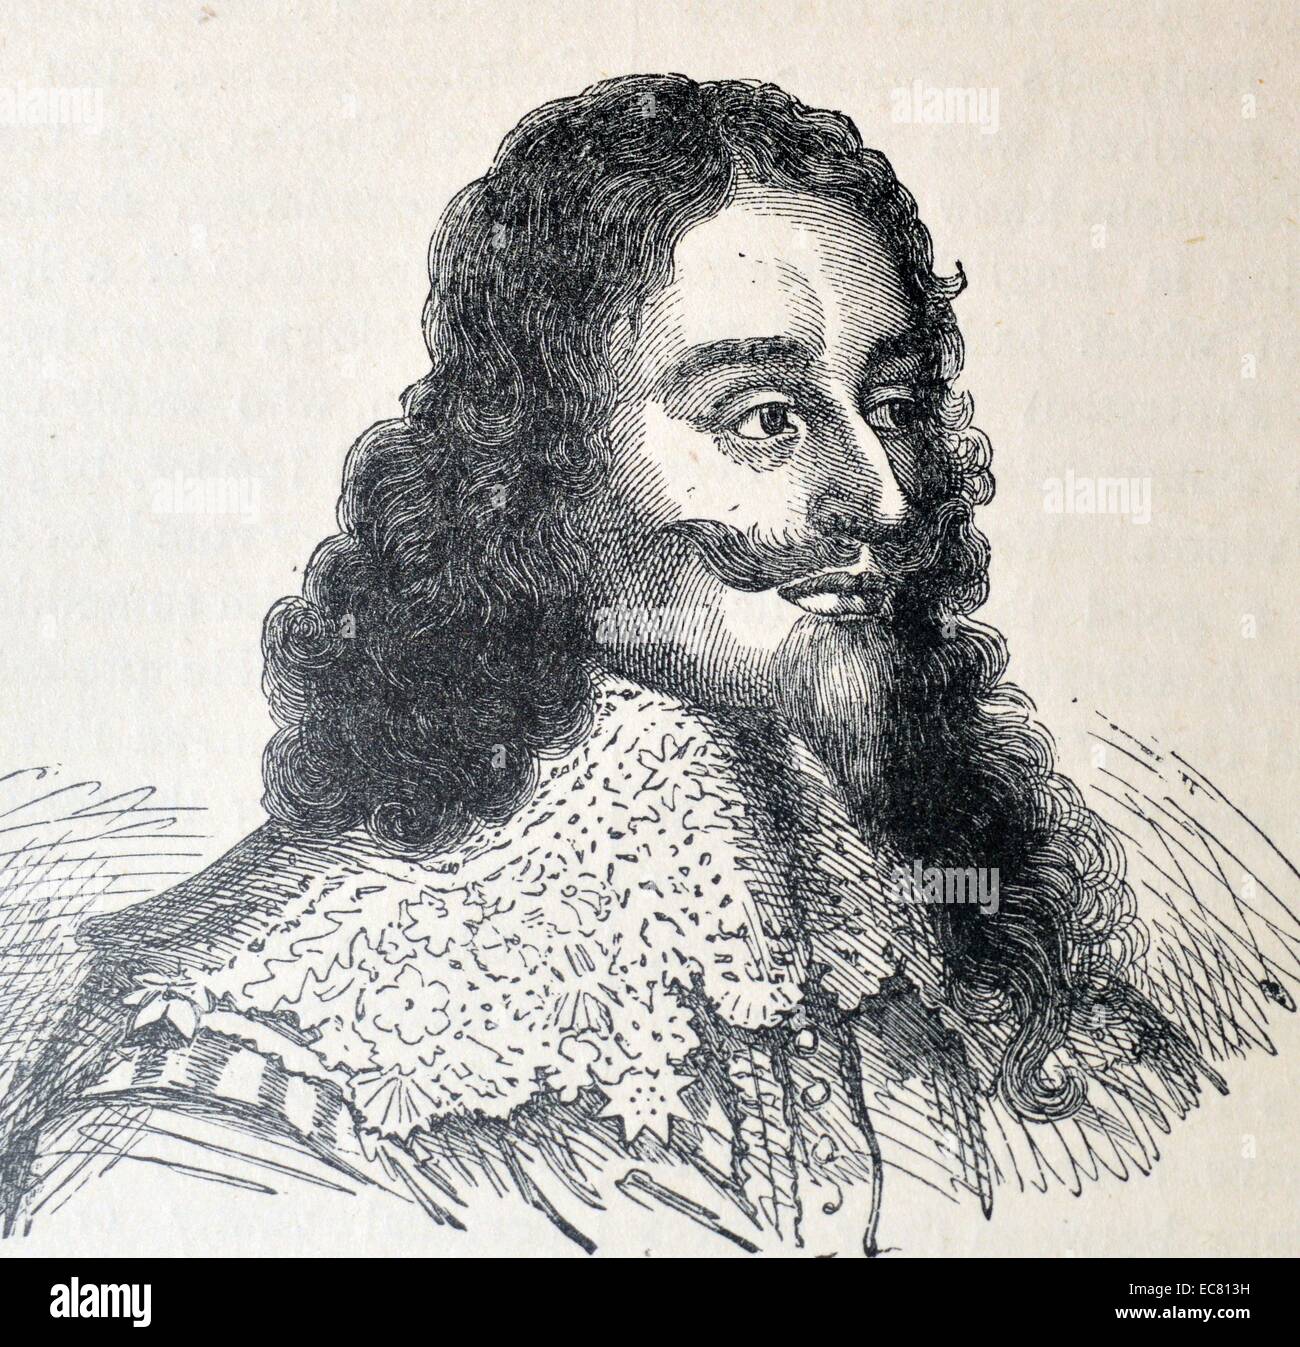 Engraving of Charles I of England (1600-1649) monarch of the three kingdoms of England, Scotland, and Ireland from 27 March 1625 until his execution in 1649. Dated 17th Century Stock Photo